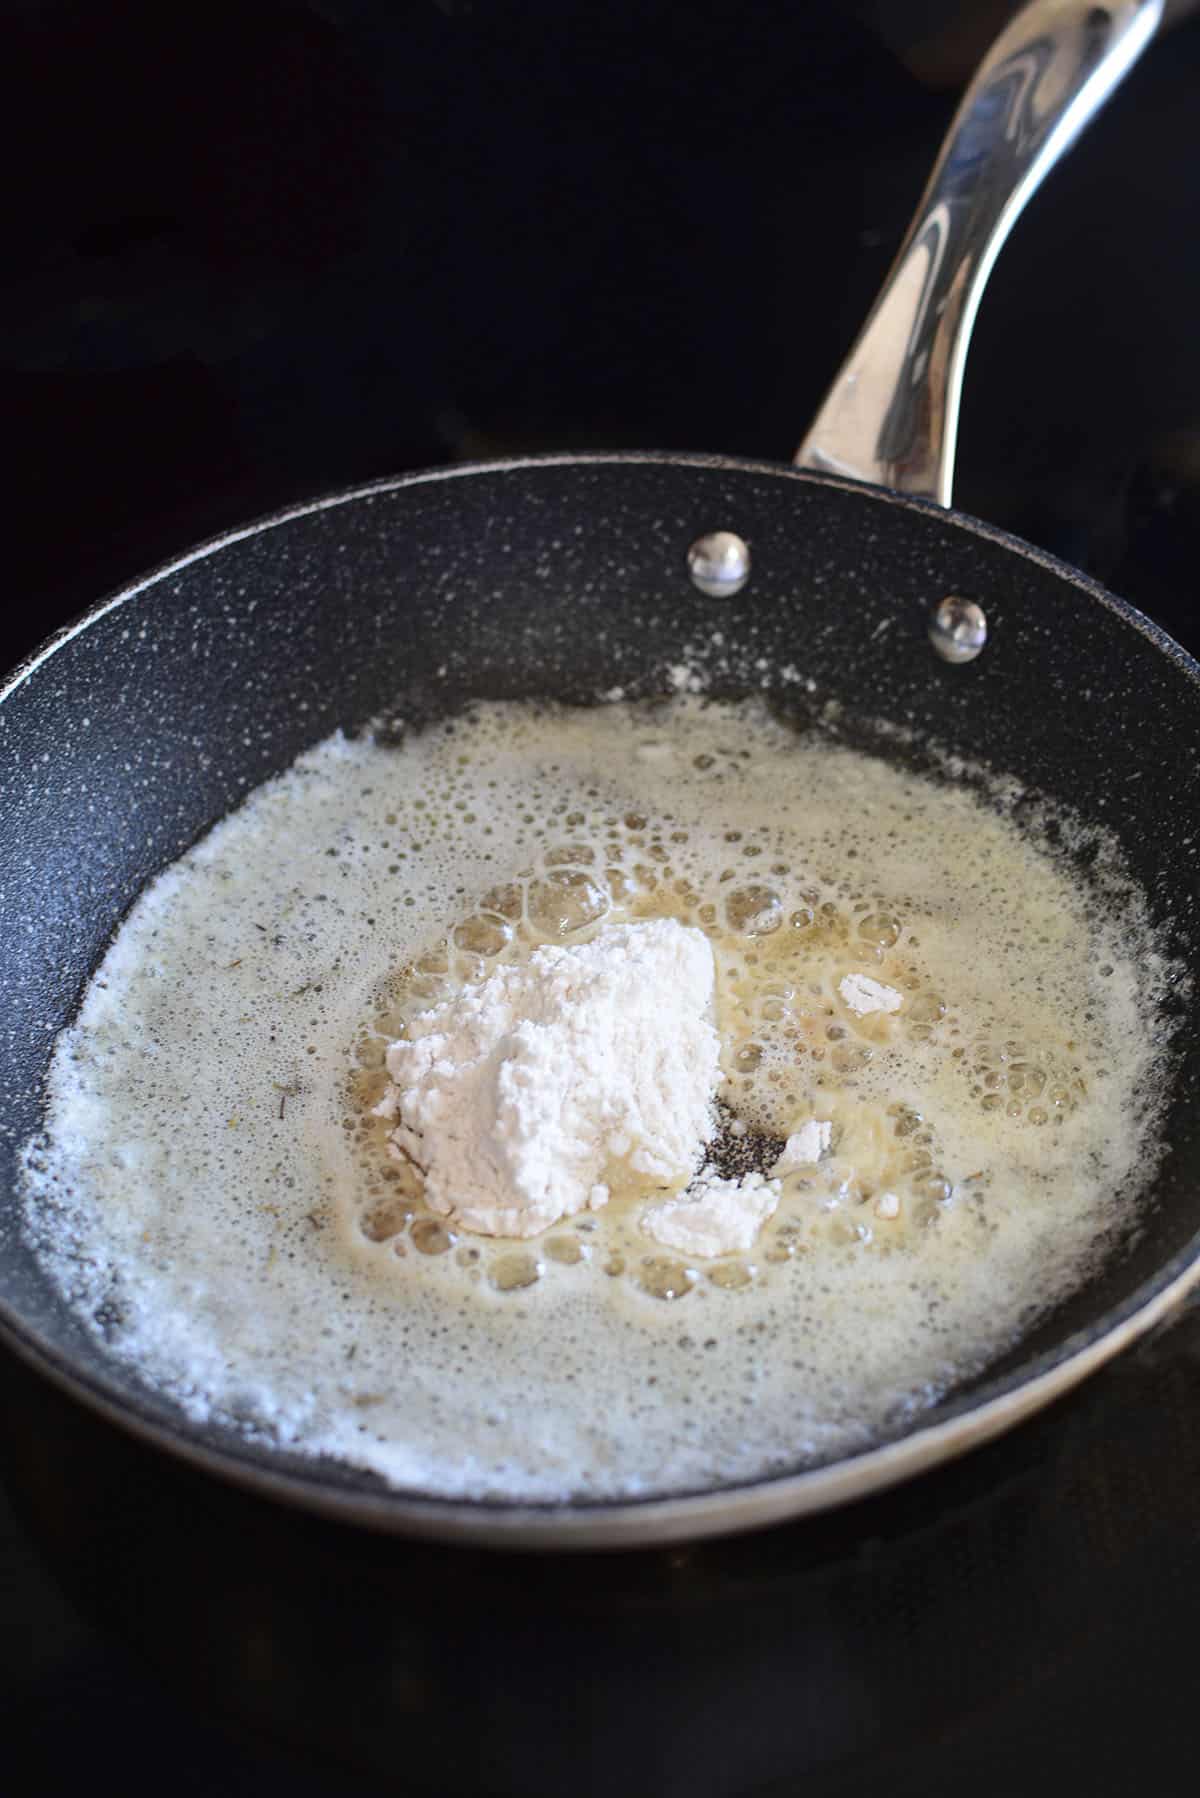 Starting to make the rue with melted butter and flour in the frying pan.